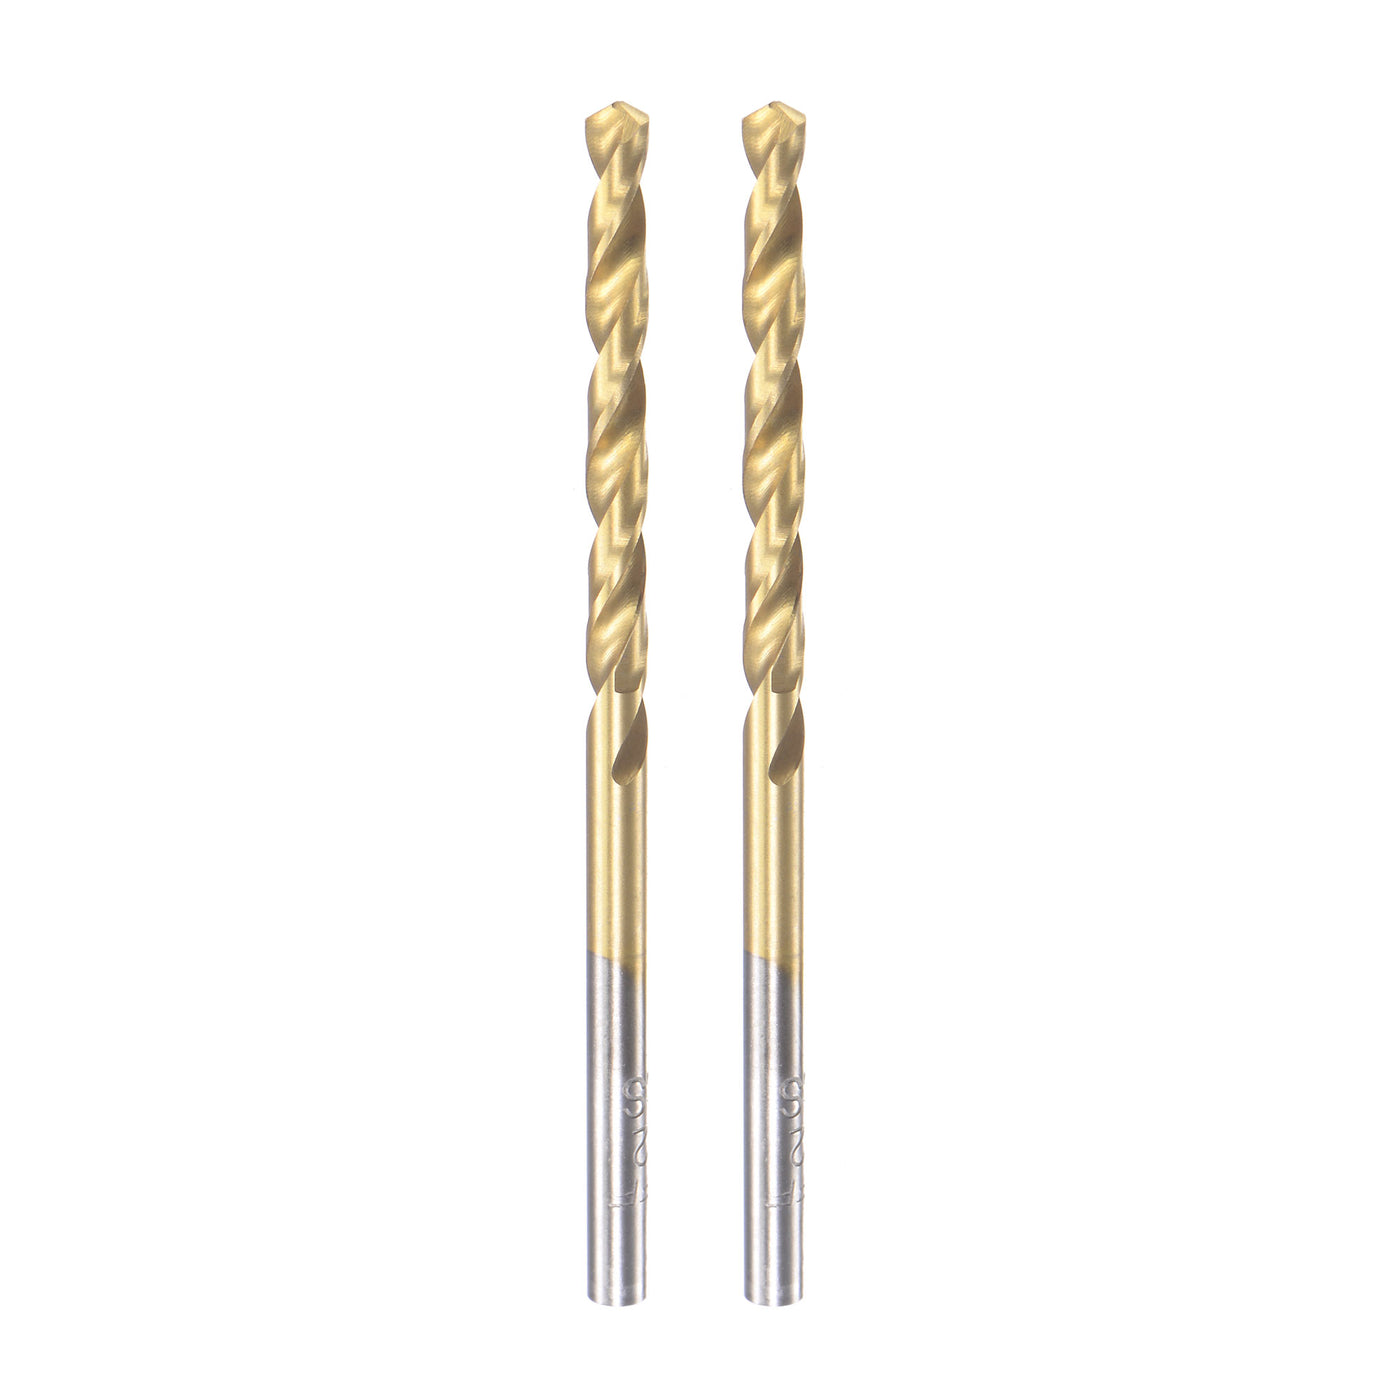 uxcell Uxcell High Speed Steel Twist Drill Bit 3.2mm Fully Ground Titanium Coated 2 Pcs